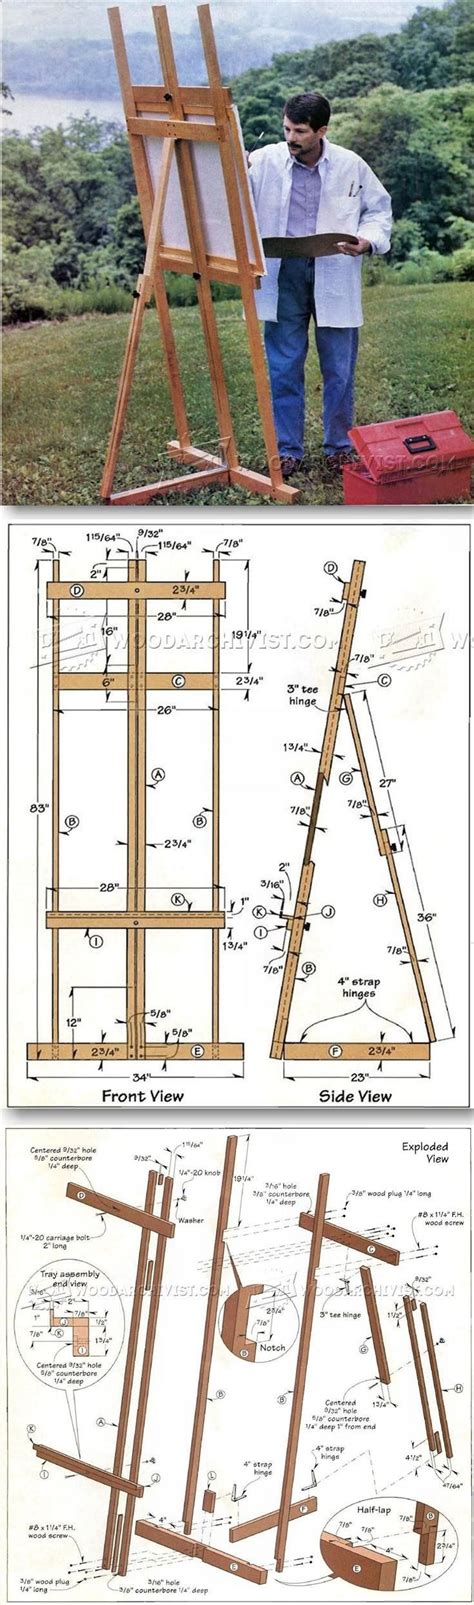 Looking to build a diy tv stand or diy media console? DIY Art Easel - Woodworking Plans and Projects ...